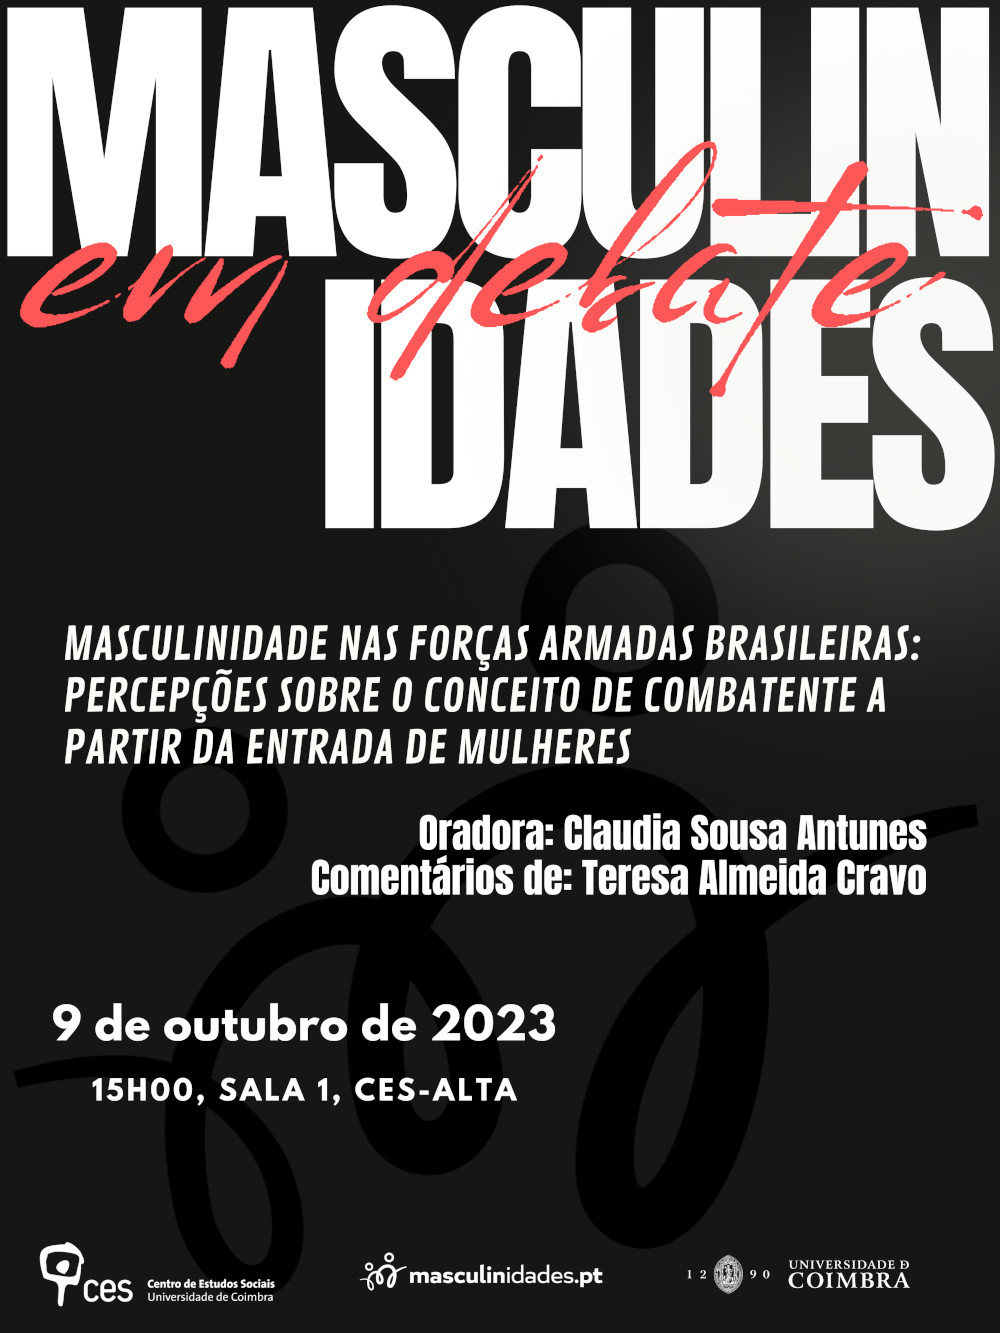 Masculinity in the Brazilian Armed Forces: perceptions of the concept of combatant ensuing from women joining the military <span id="edit_43975"><script>$(function() { $('#edit_43975').load( "/myces/user/editobj.php?tipo=evento&id=43975" ); });</script></span>